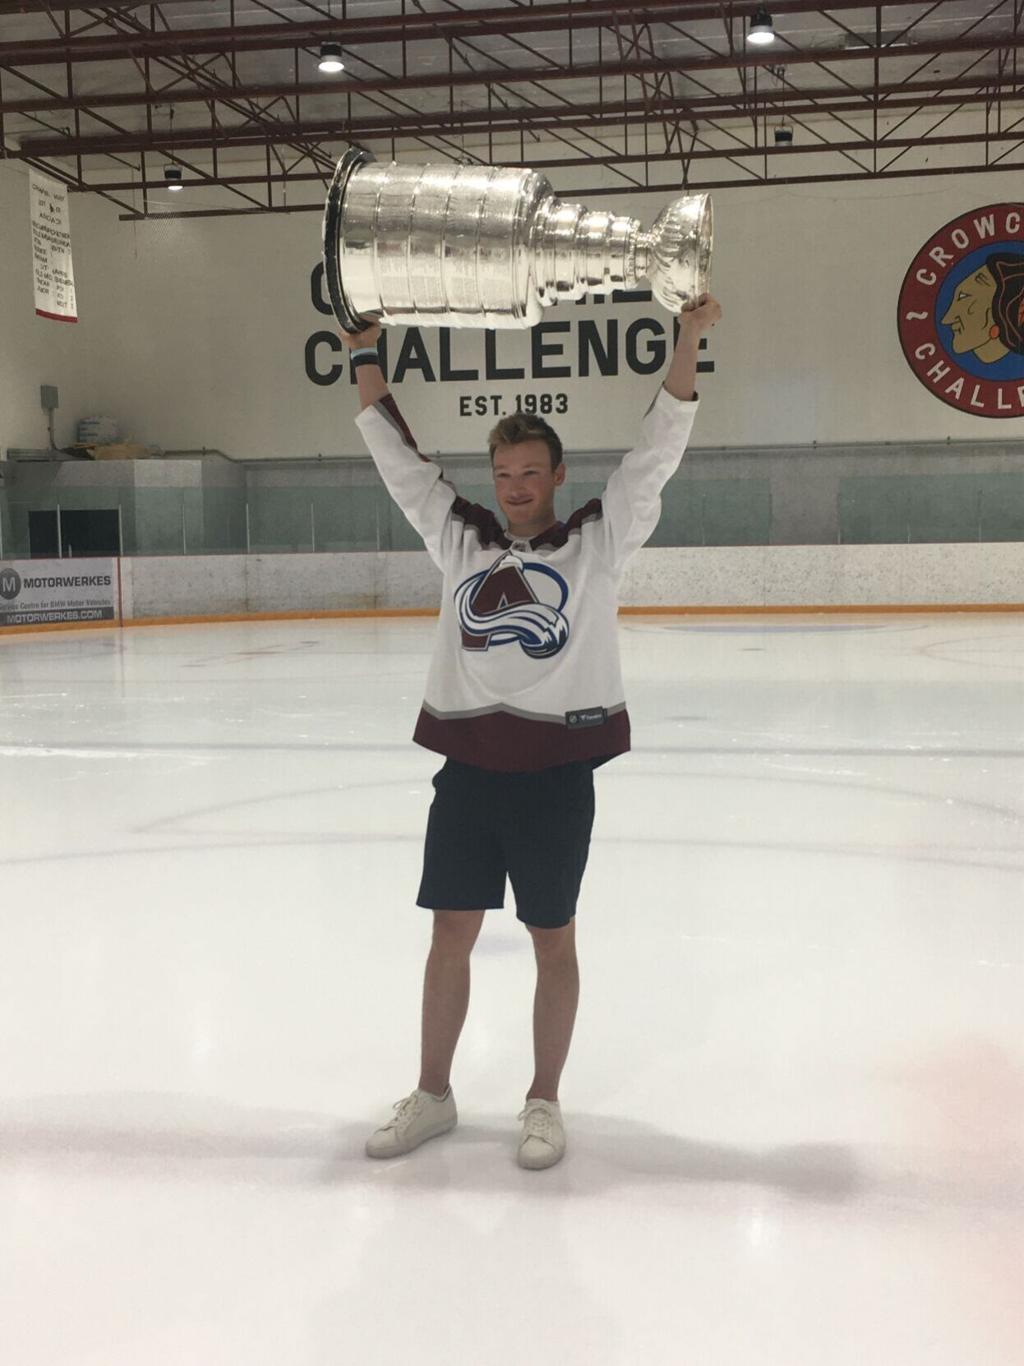 Calgary native Cale Makar raises Stanley Cup after dominant NHL